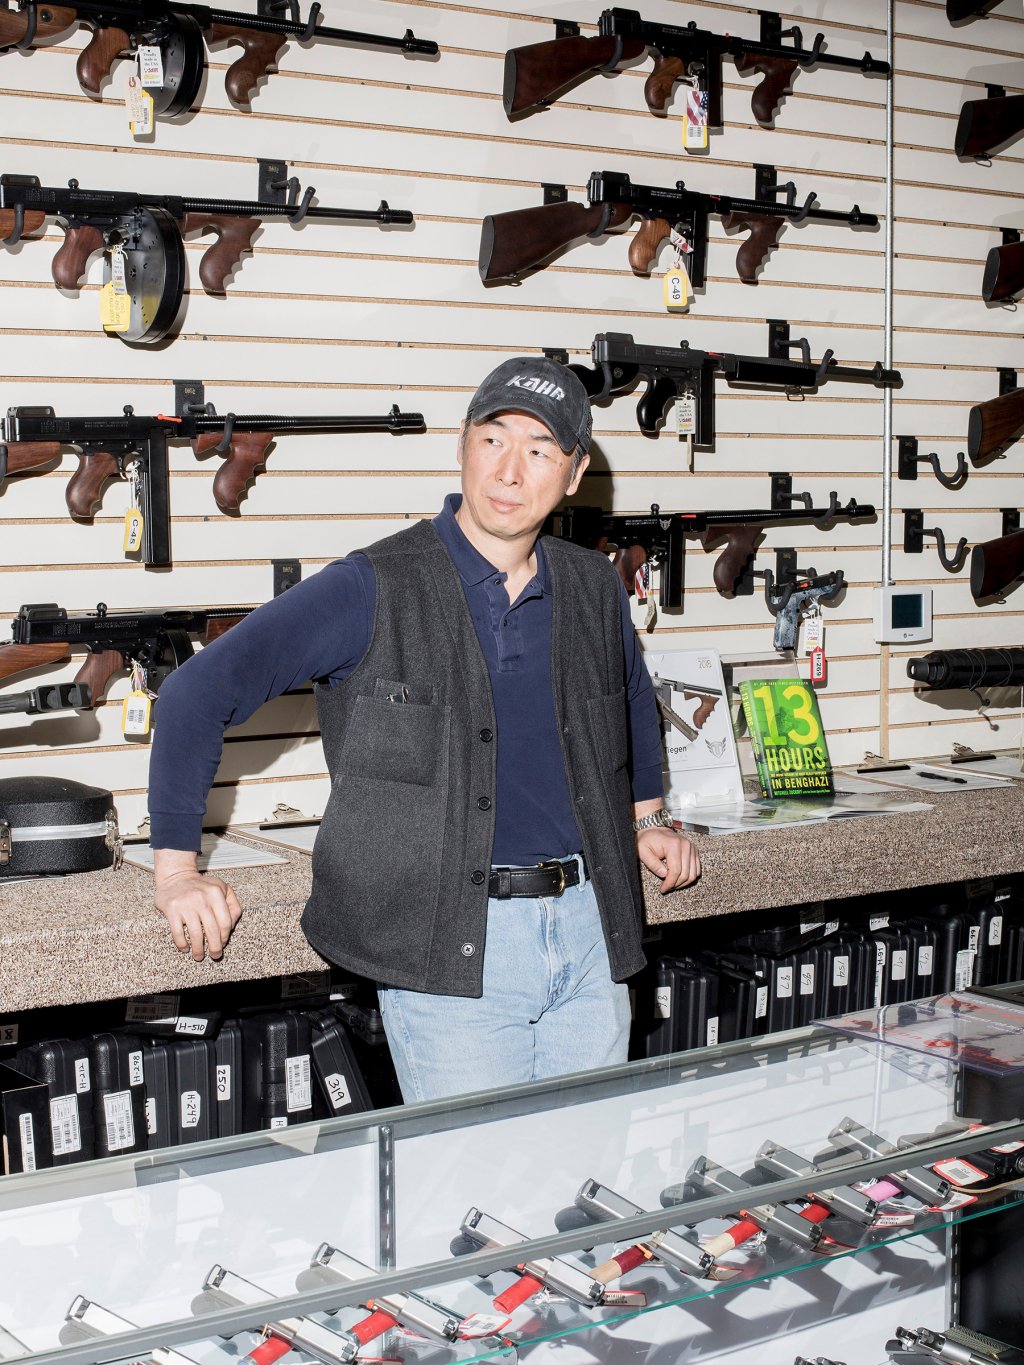 Kahr Arms owner Justin Moon poses for a portrait at Kahr Arms' Tommy Gun Warehouse on Kahr Ave., in Greeley, Penn., on April 26, 2018.